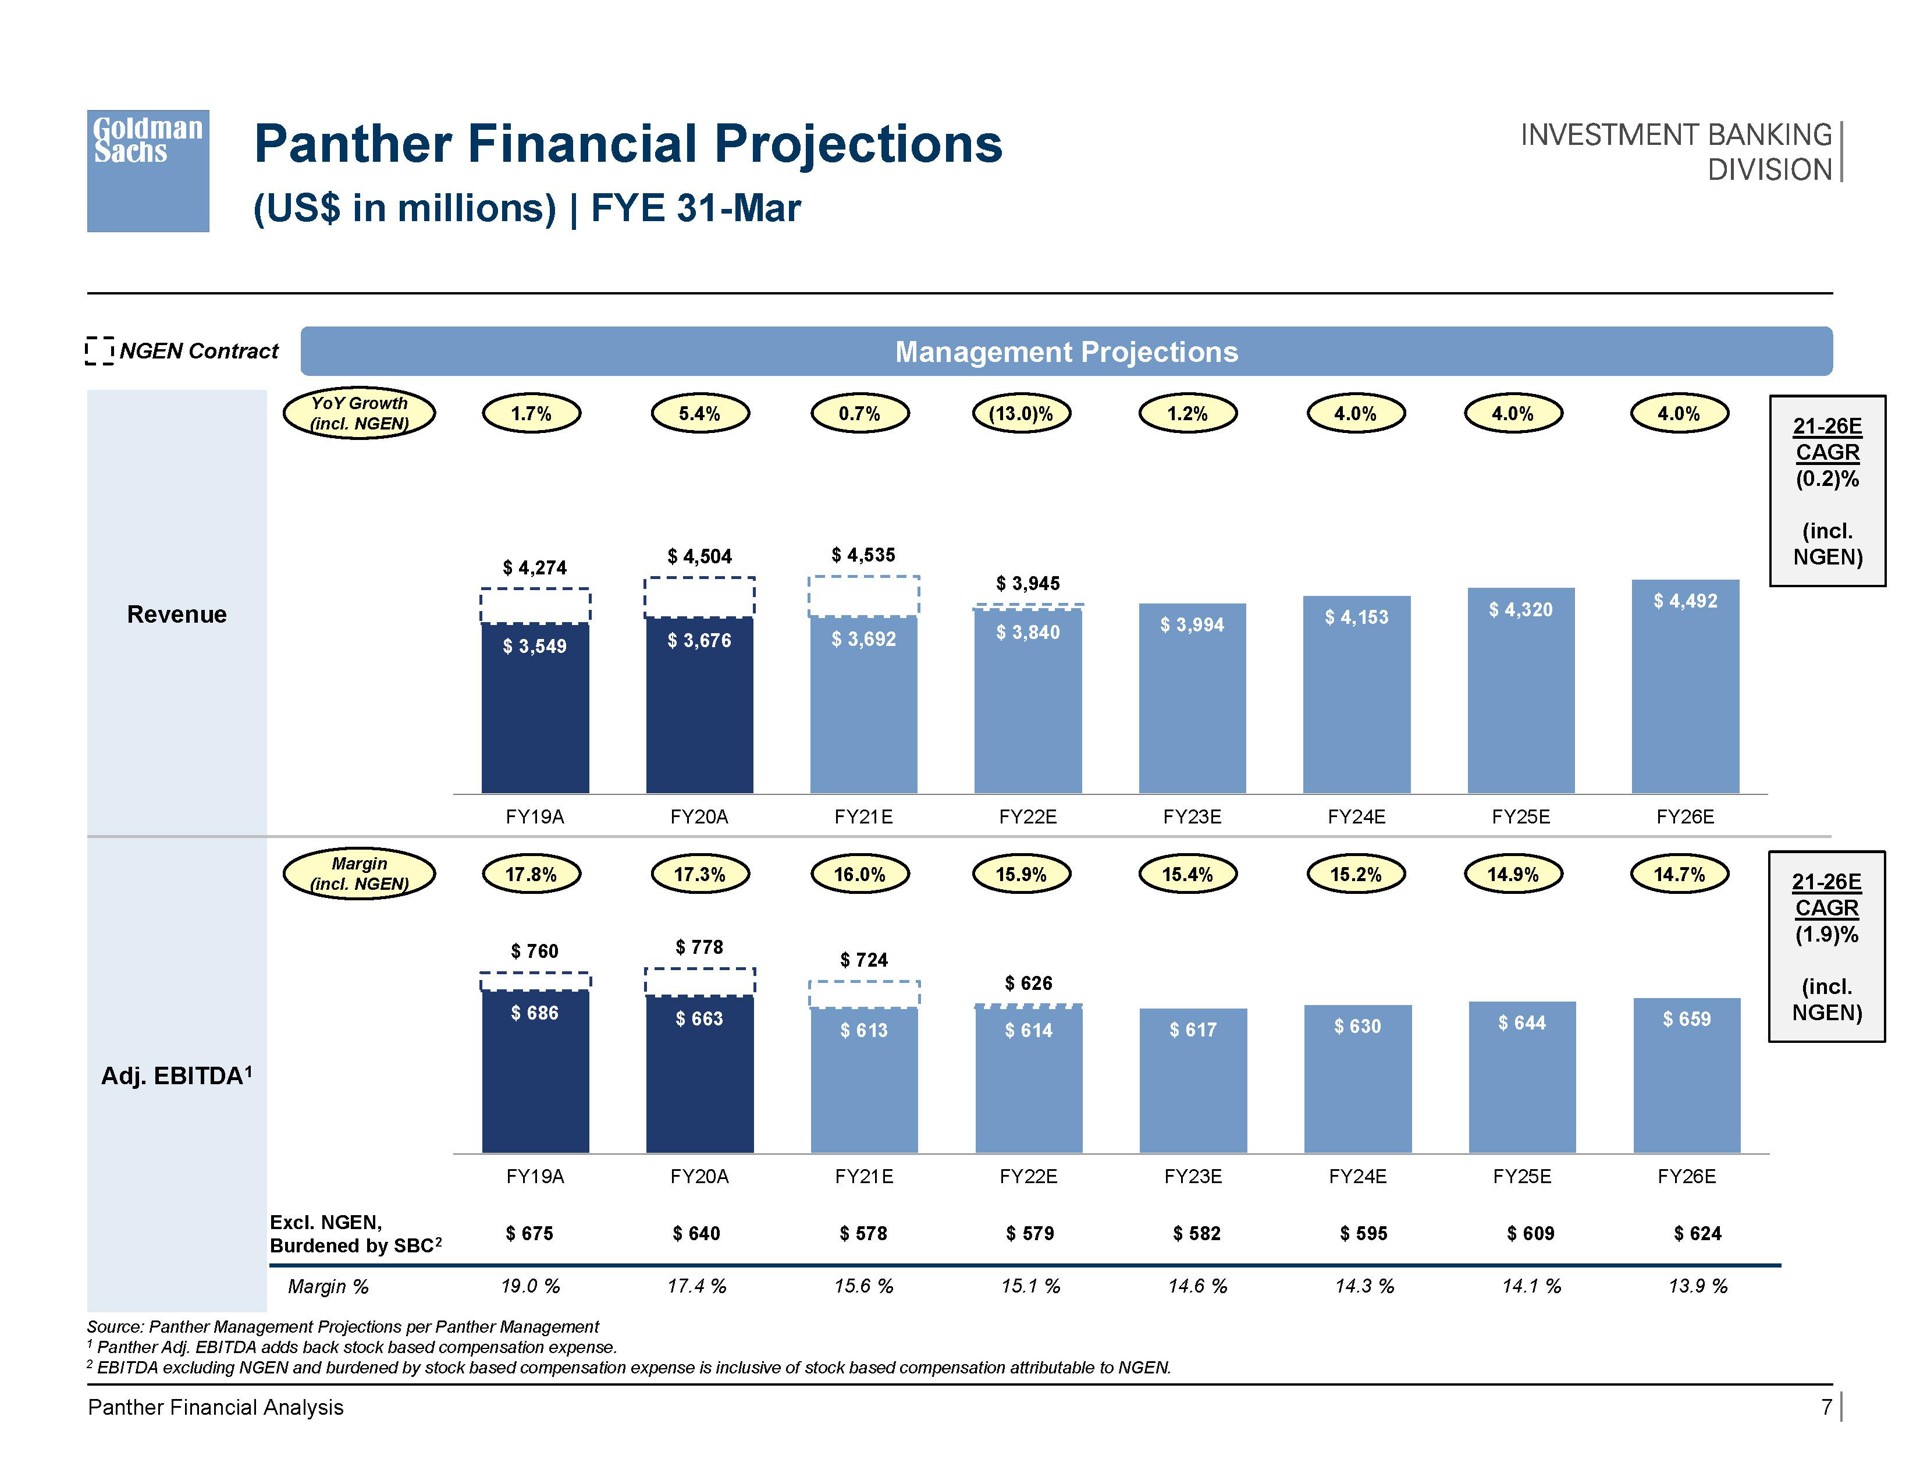 panther financial projections dee | Goldman Sachs